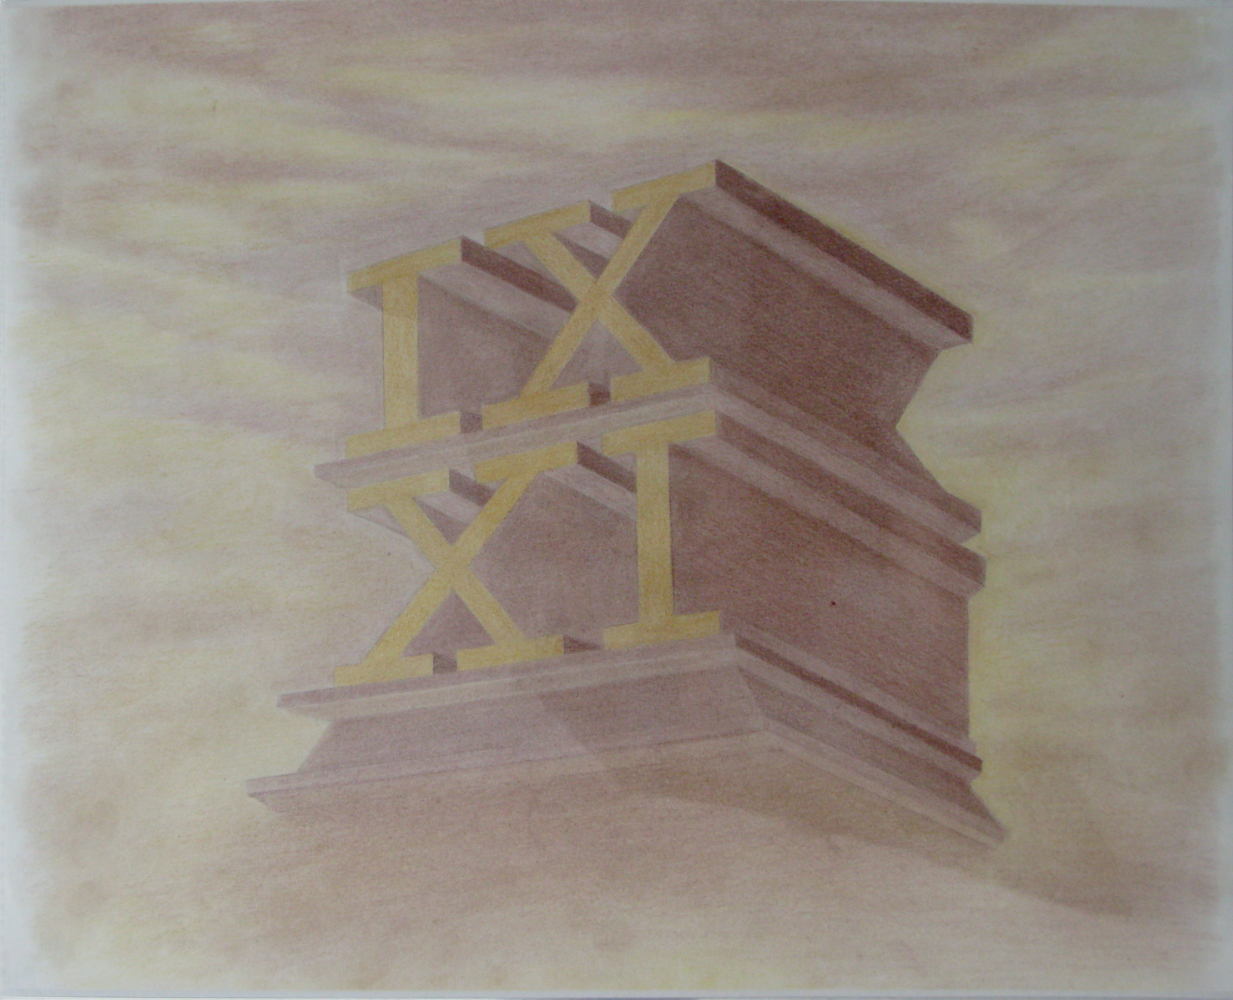 thumbnail of Drawing Yellow IX XI (20th Century Fox) made of graphite on paper. date: 2011. dimensions: 16 x 20 x 1.5 inches